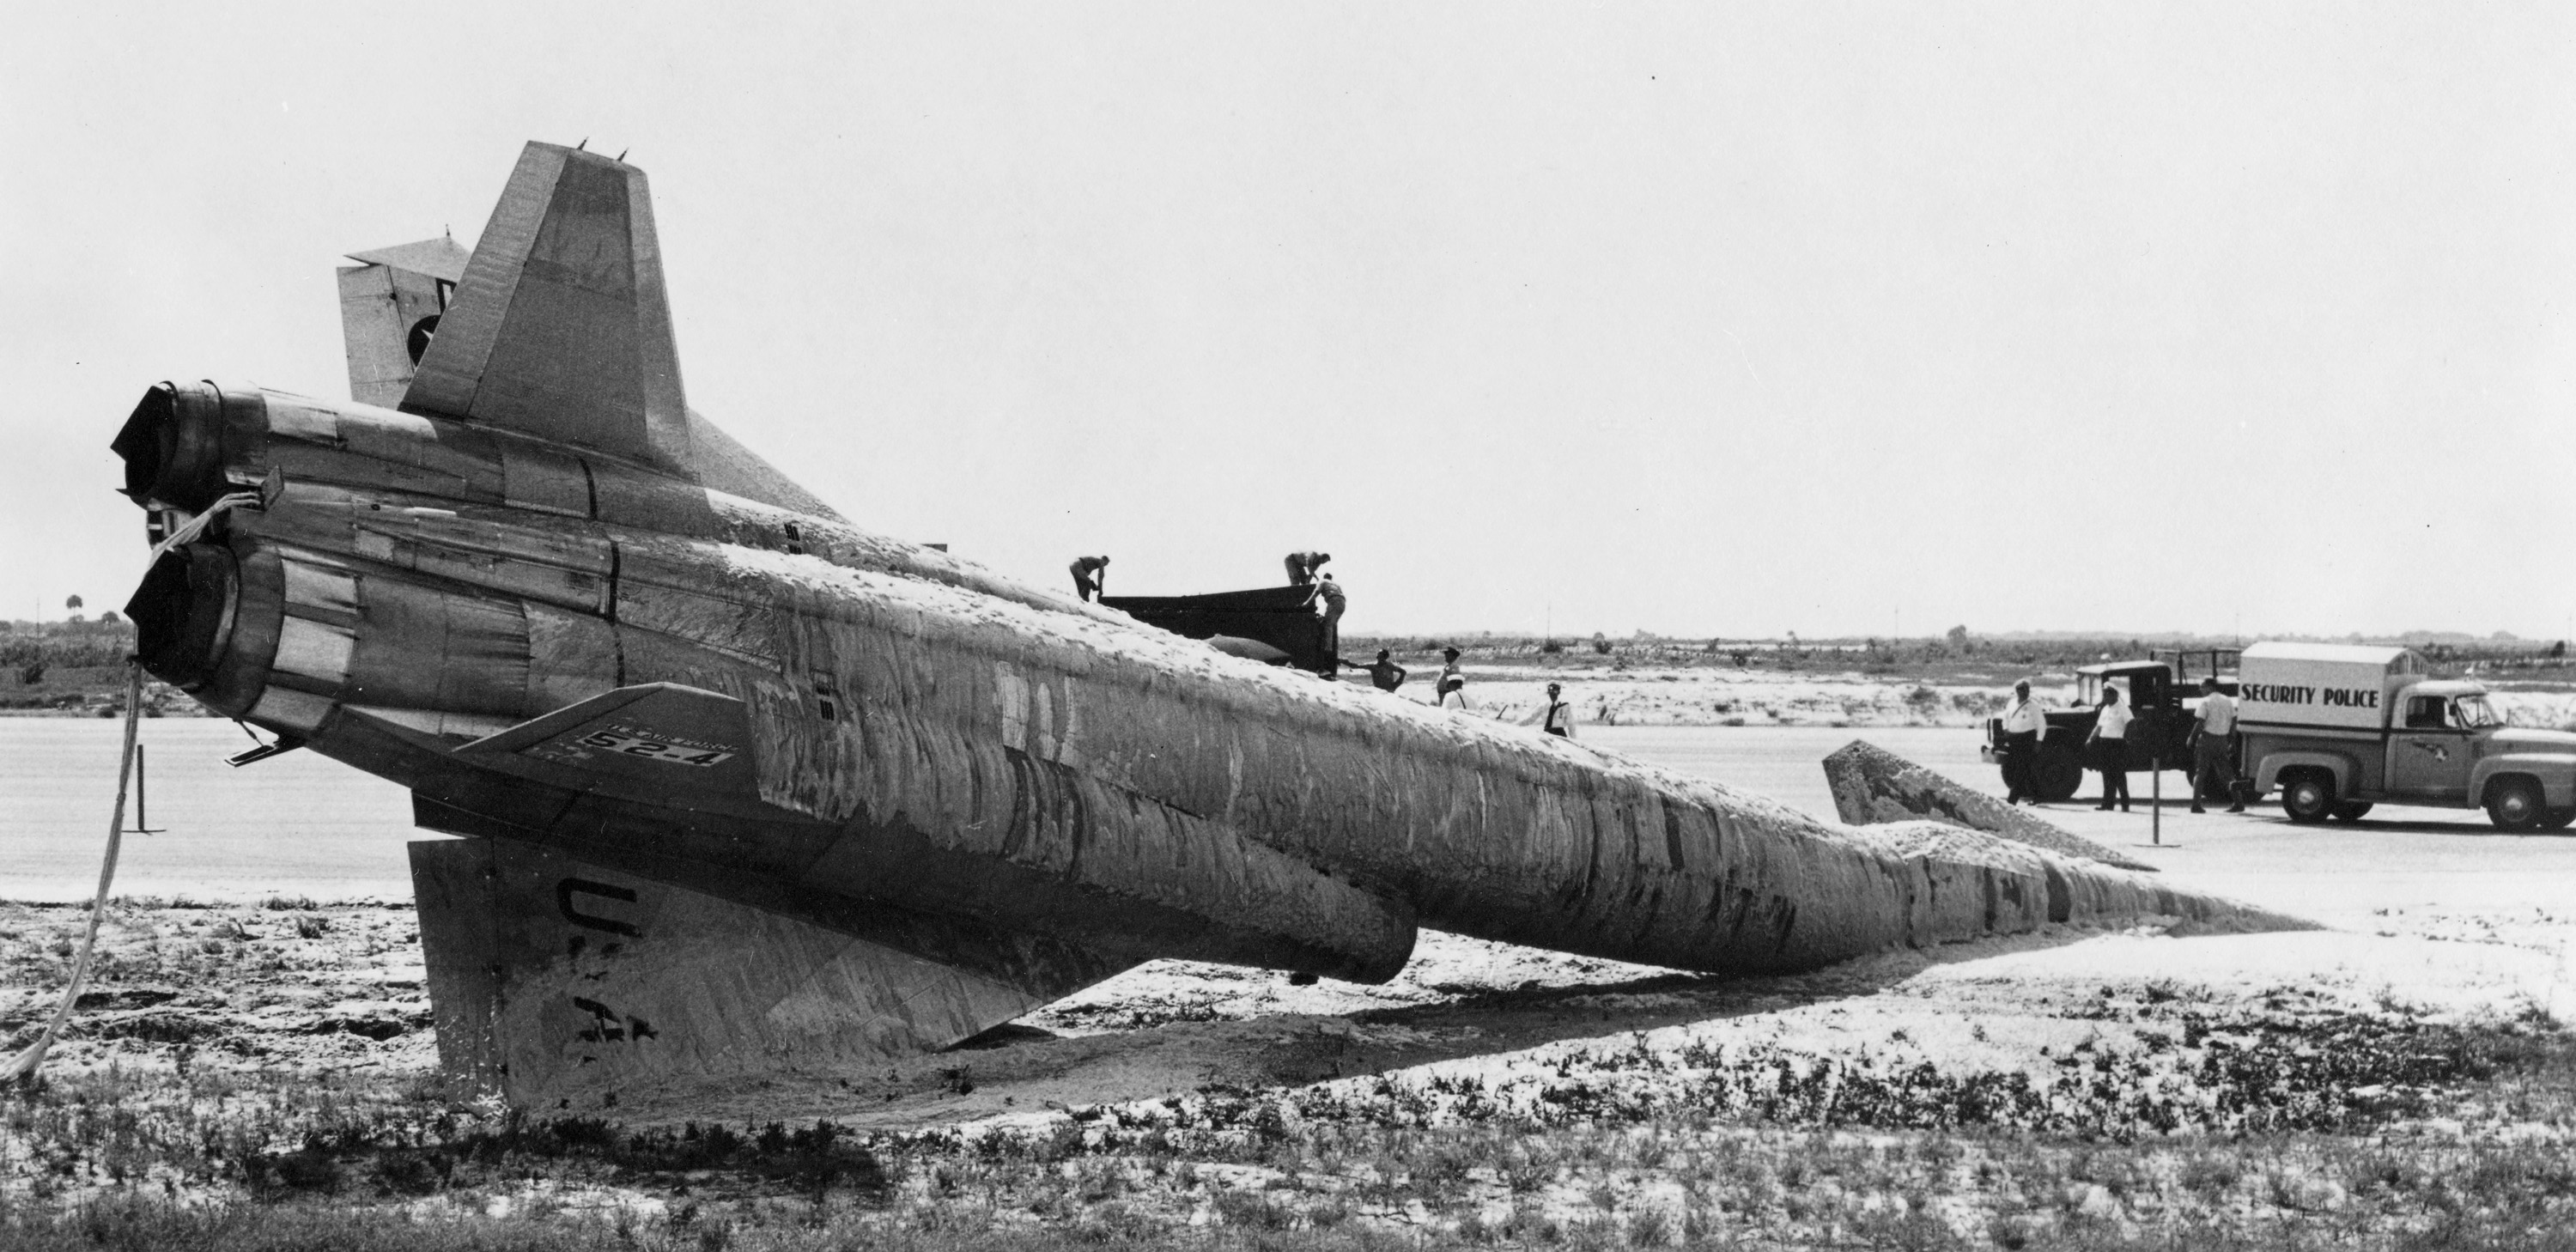 Flights out of the Air Force Missile Test Center at Cape Canaveral had their share of X-10 mishaps just like the flights out of Edwards.  X-10 number 52-4 performed an uncontrolled landing on the Skid Strip.